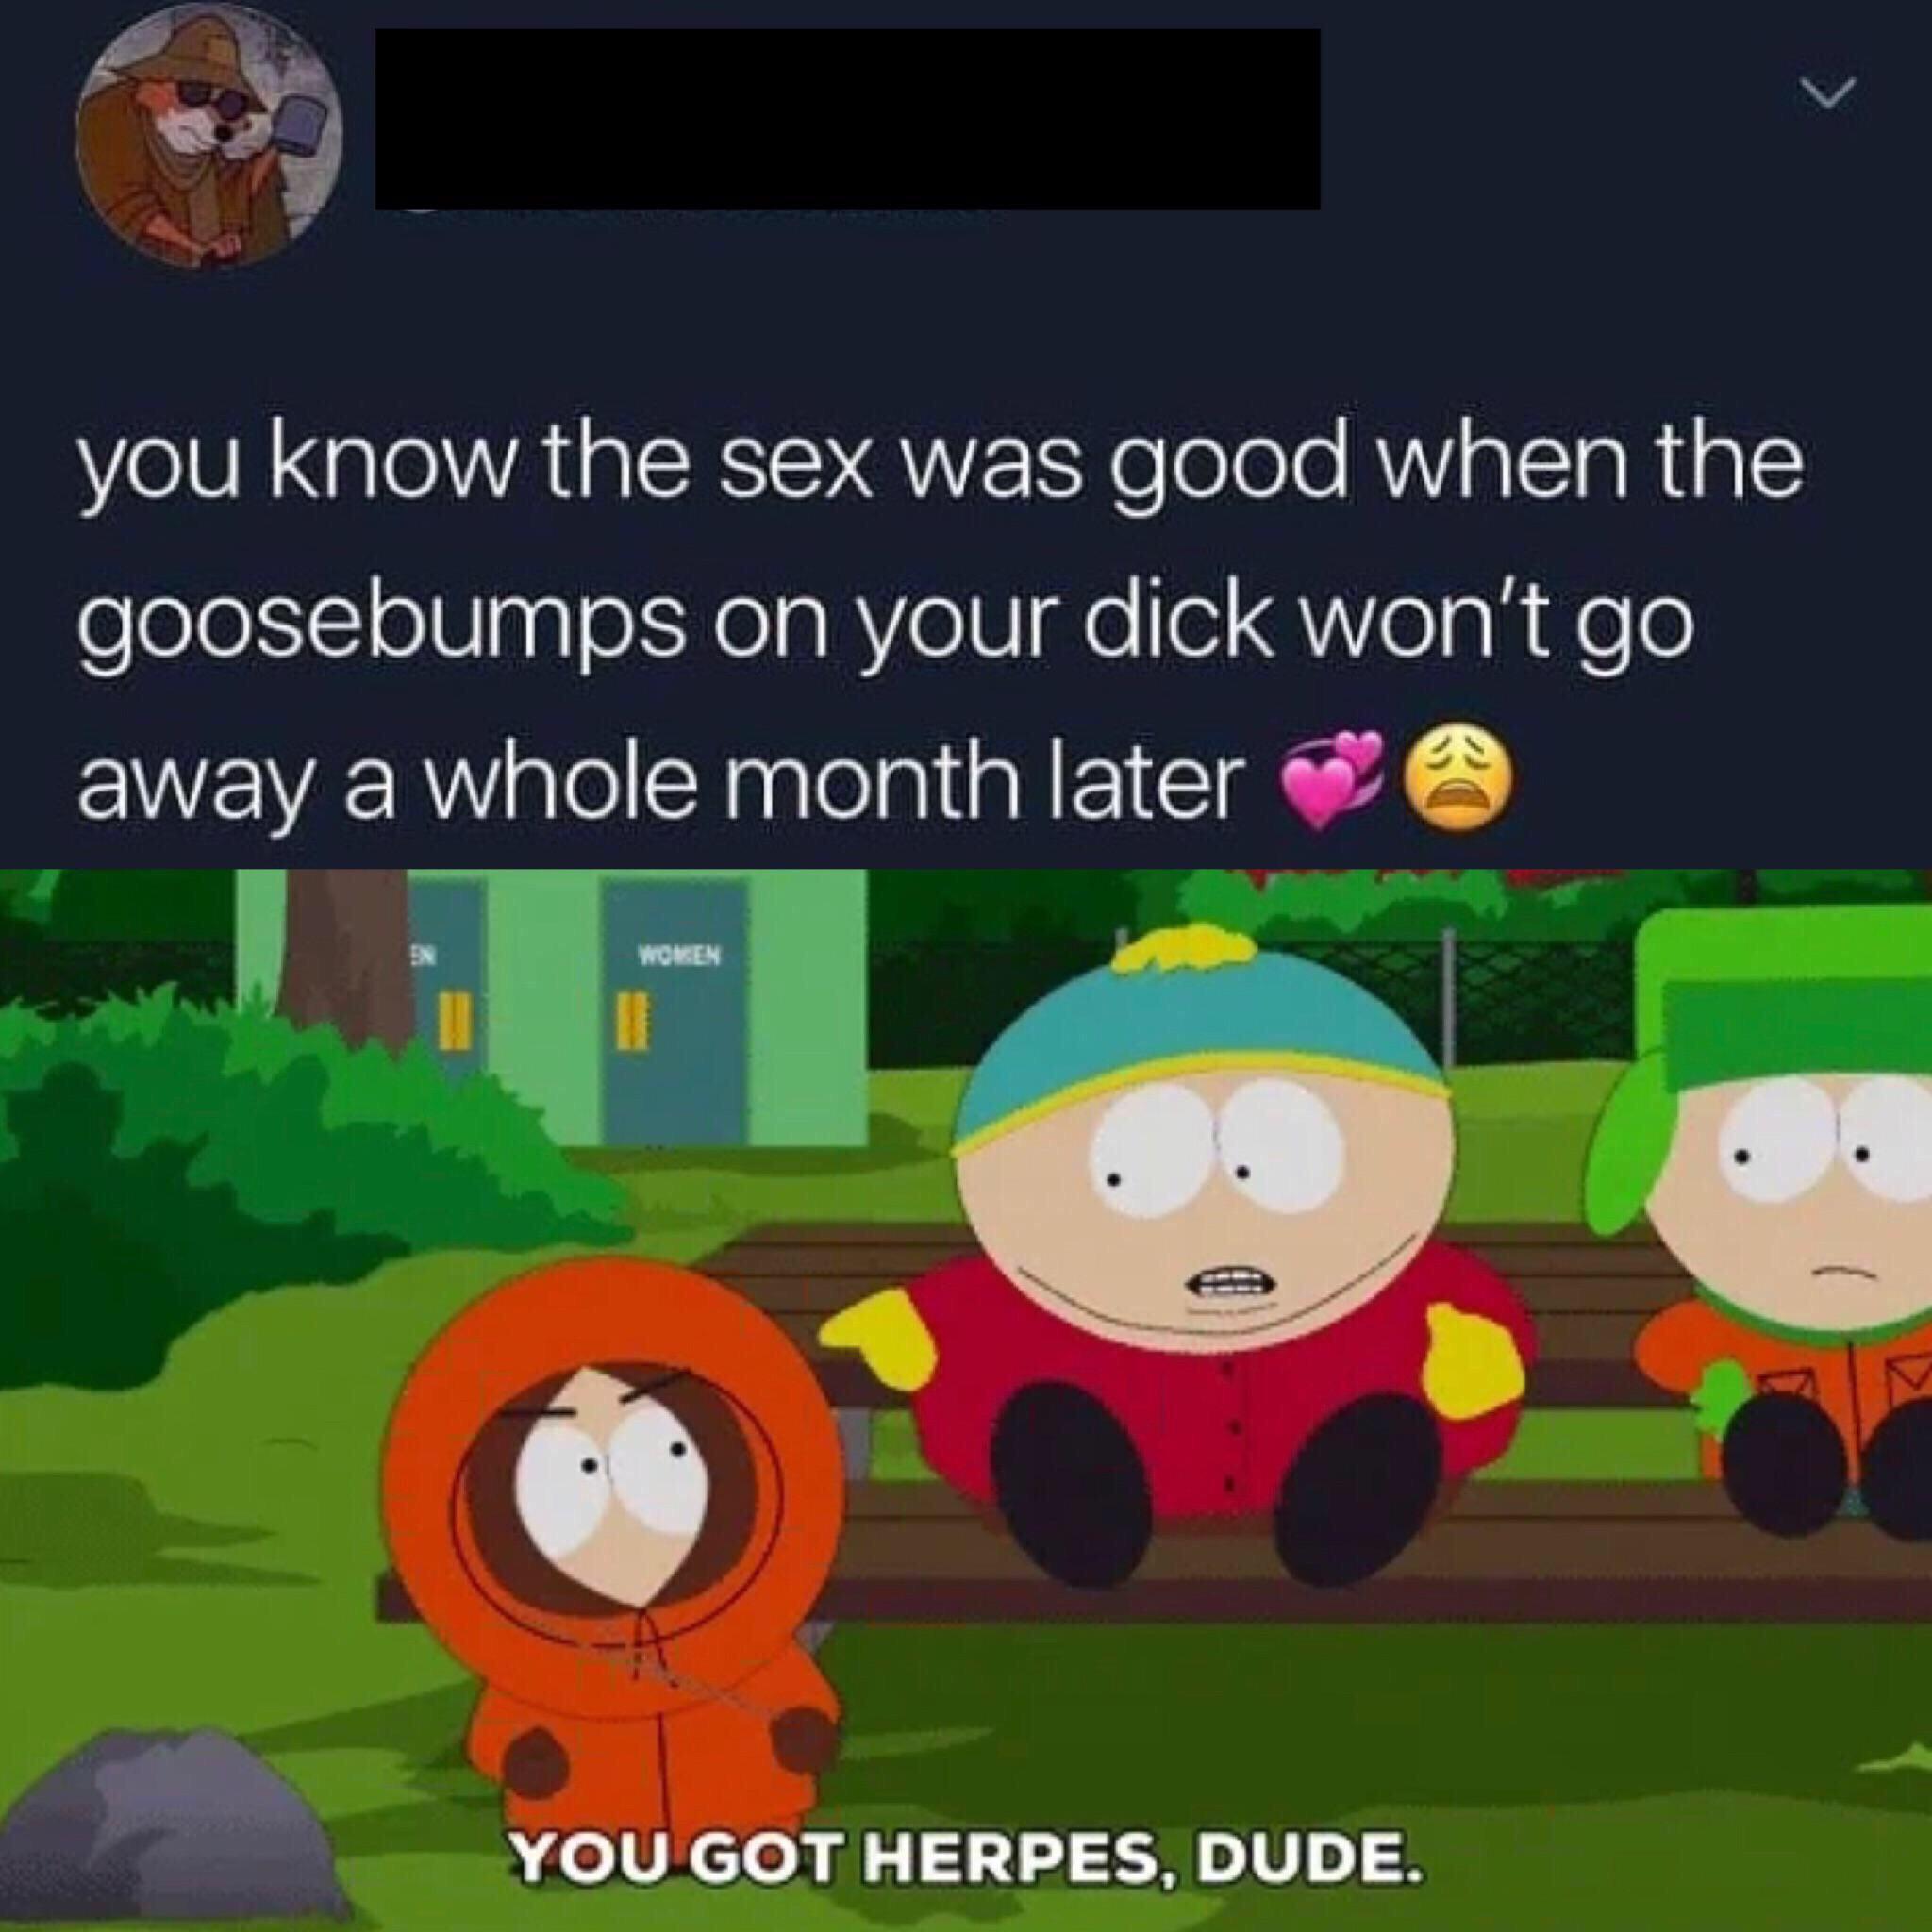 belle delphine bath water meme - you know the sex was good when the goosebumps on your dick won't go away a whole month later Woen You Got Herpes, Dude.